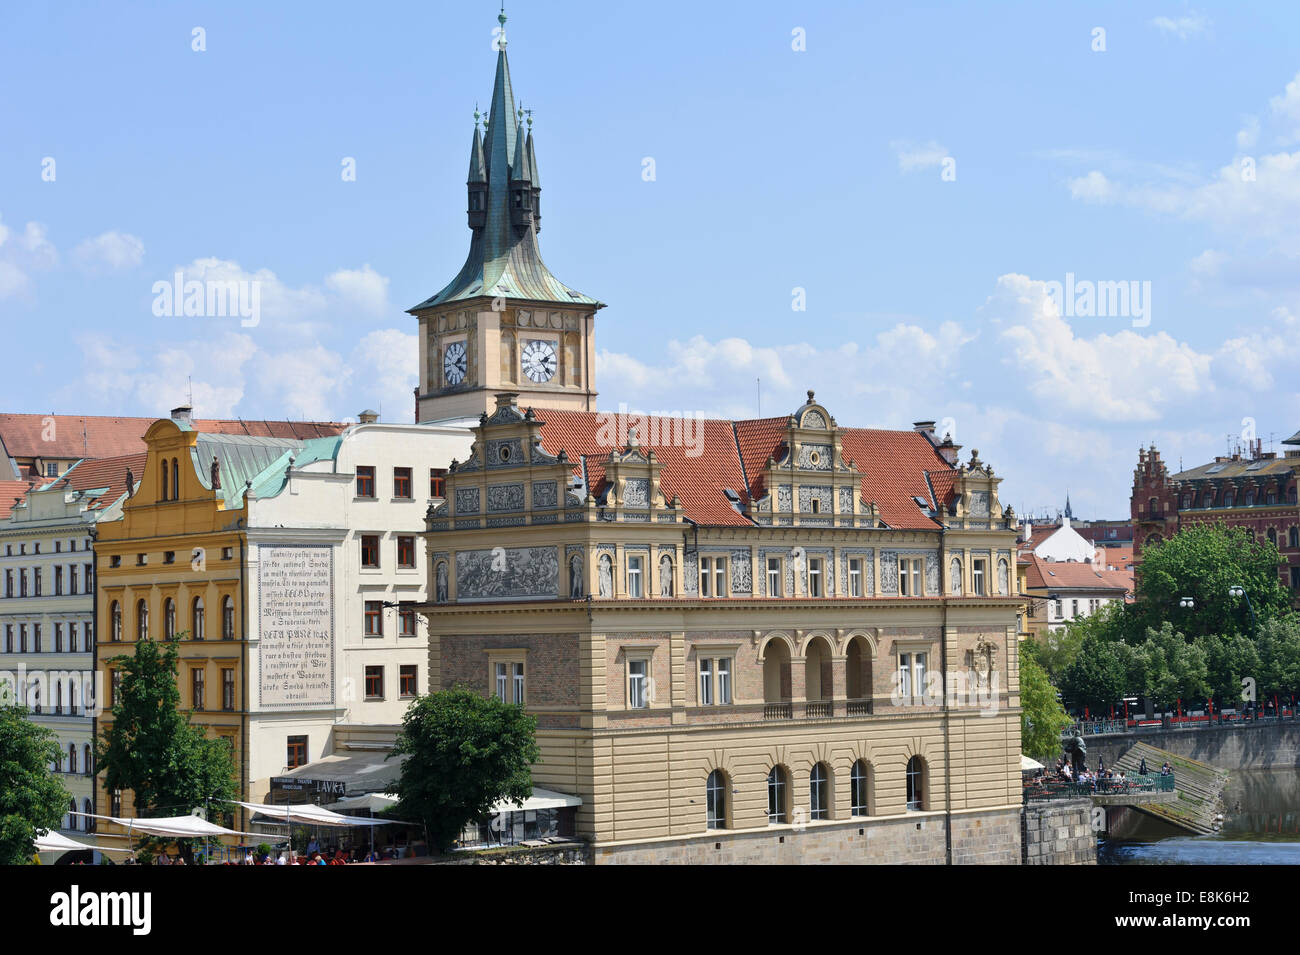 A traditional decorative building with a clock tower by the Vltava river in the City of Prague, Czech Republic. Stock Photo